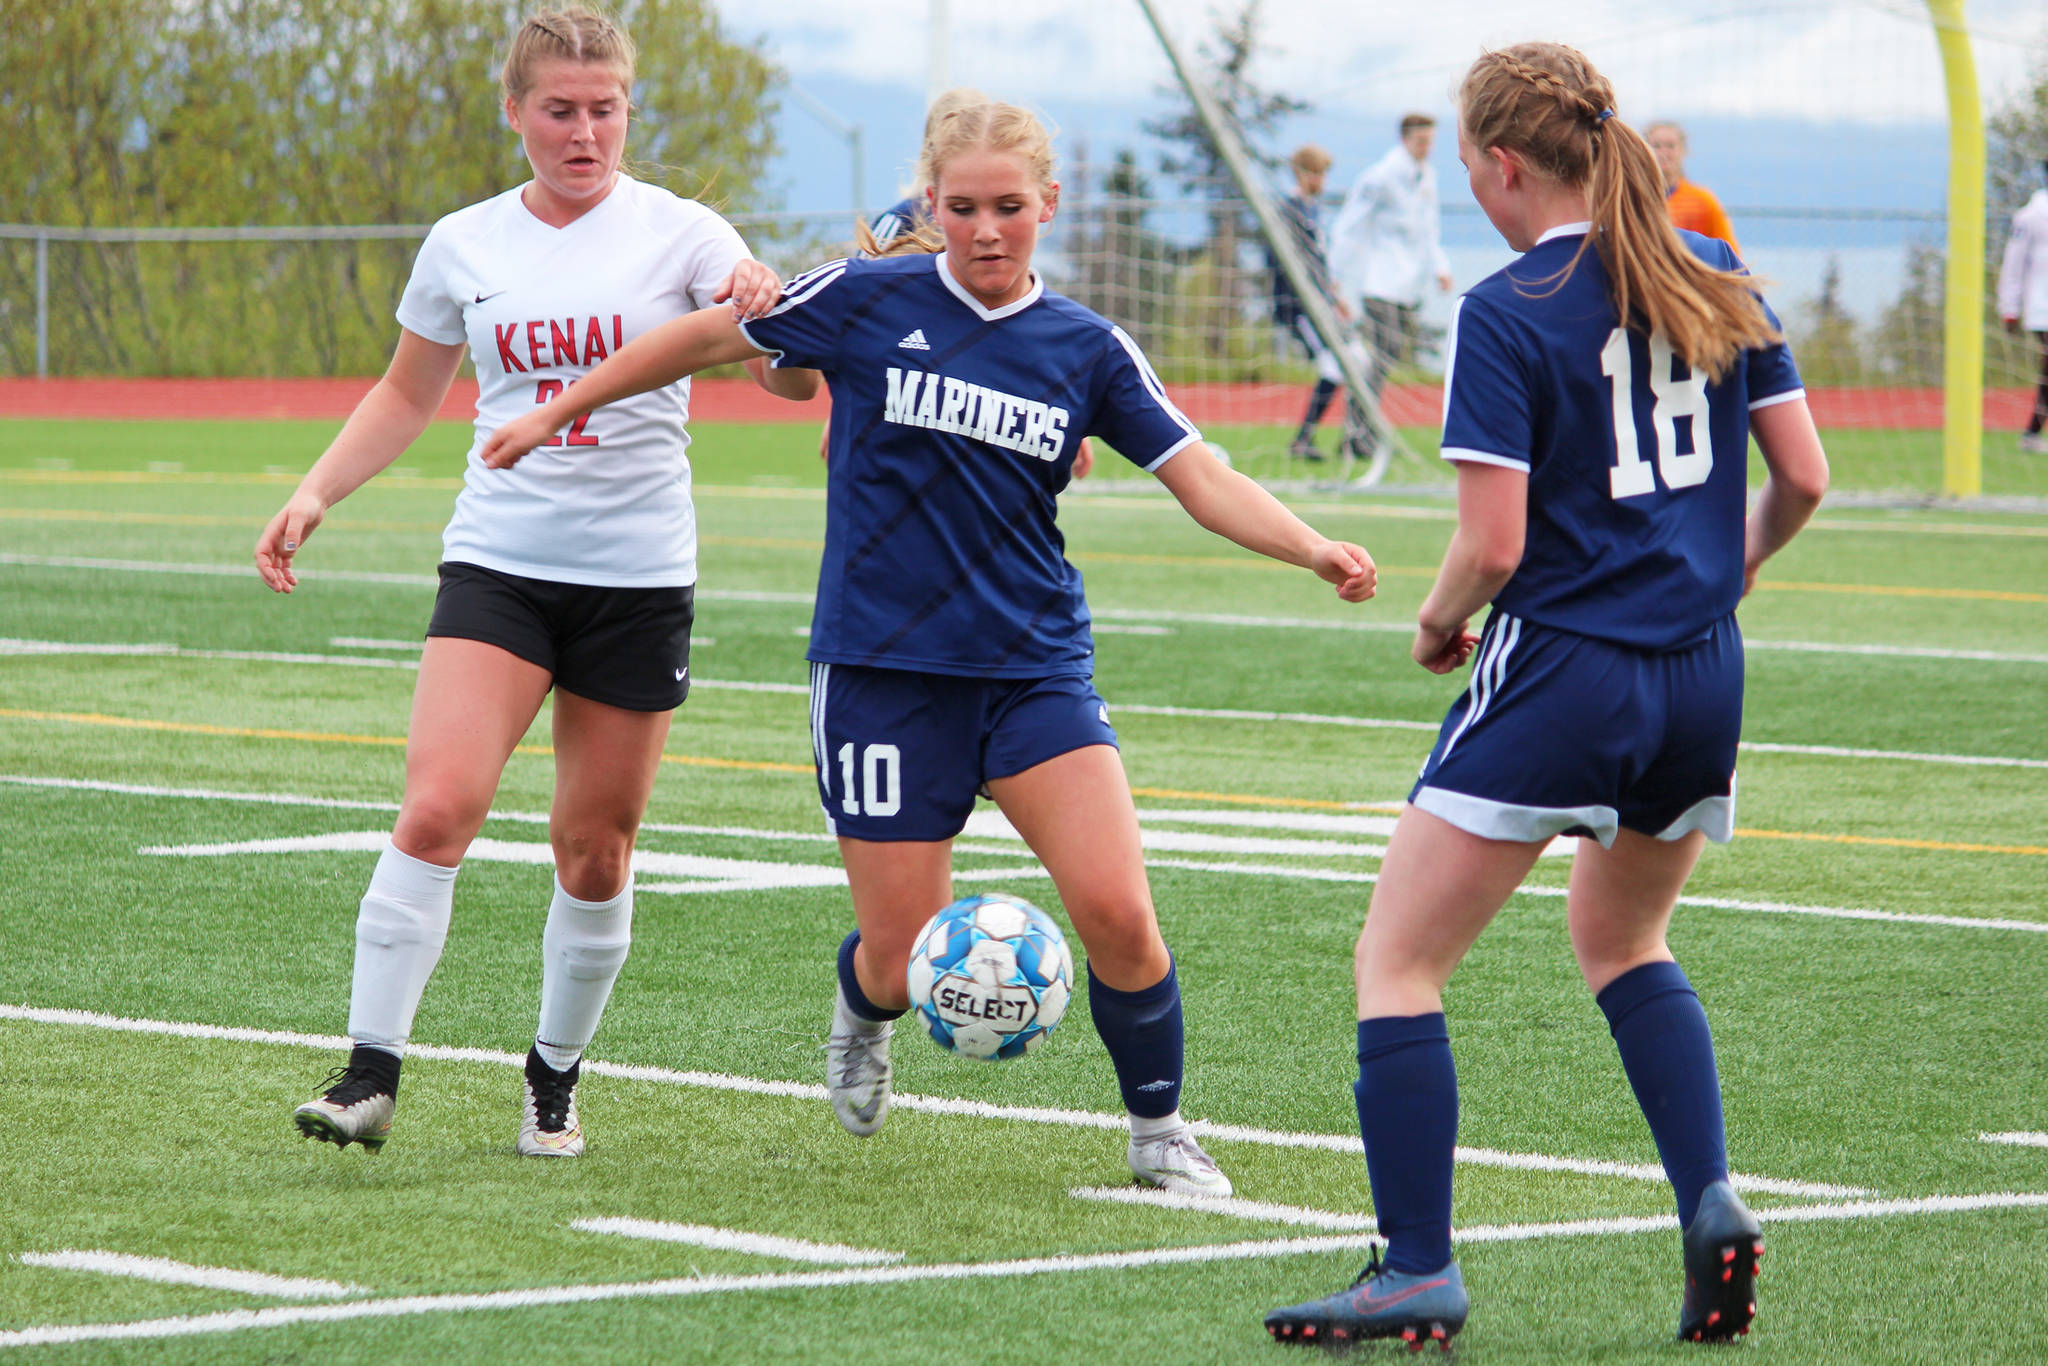 Homer’s Paige Jones (center) passes off the ball to teammate Zoe Stonorov (No. 18) under pressure from Kenai’s Olivia Brewer during the semi-final game of the Peninsula Conference Soccer Tournament on Friday, May 17, 2019 at Homer High School in Homer, Alaska. (Photo by Megan Pacer/Homer News)